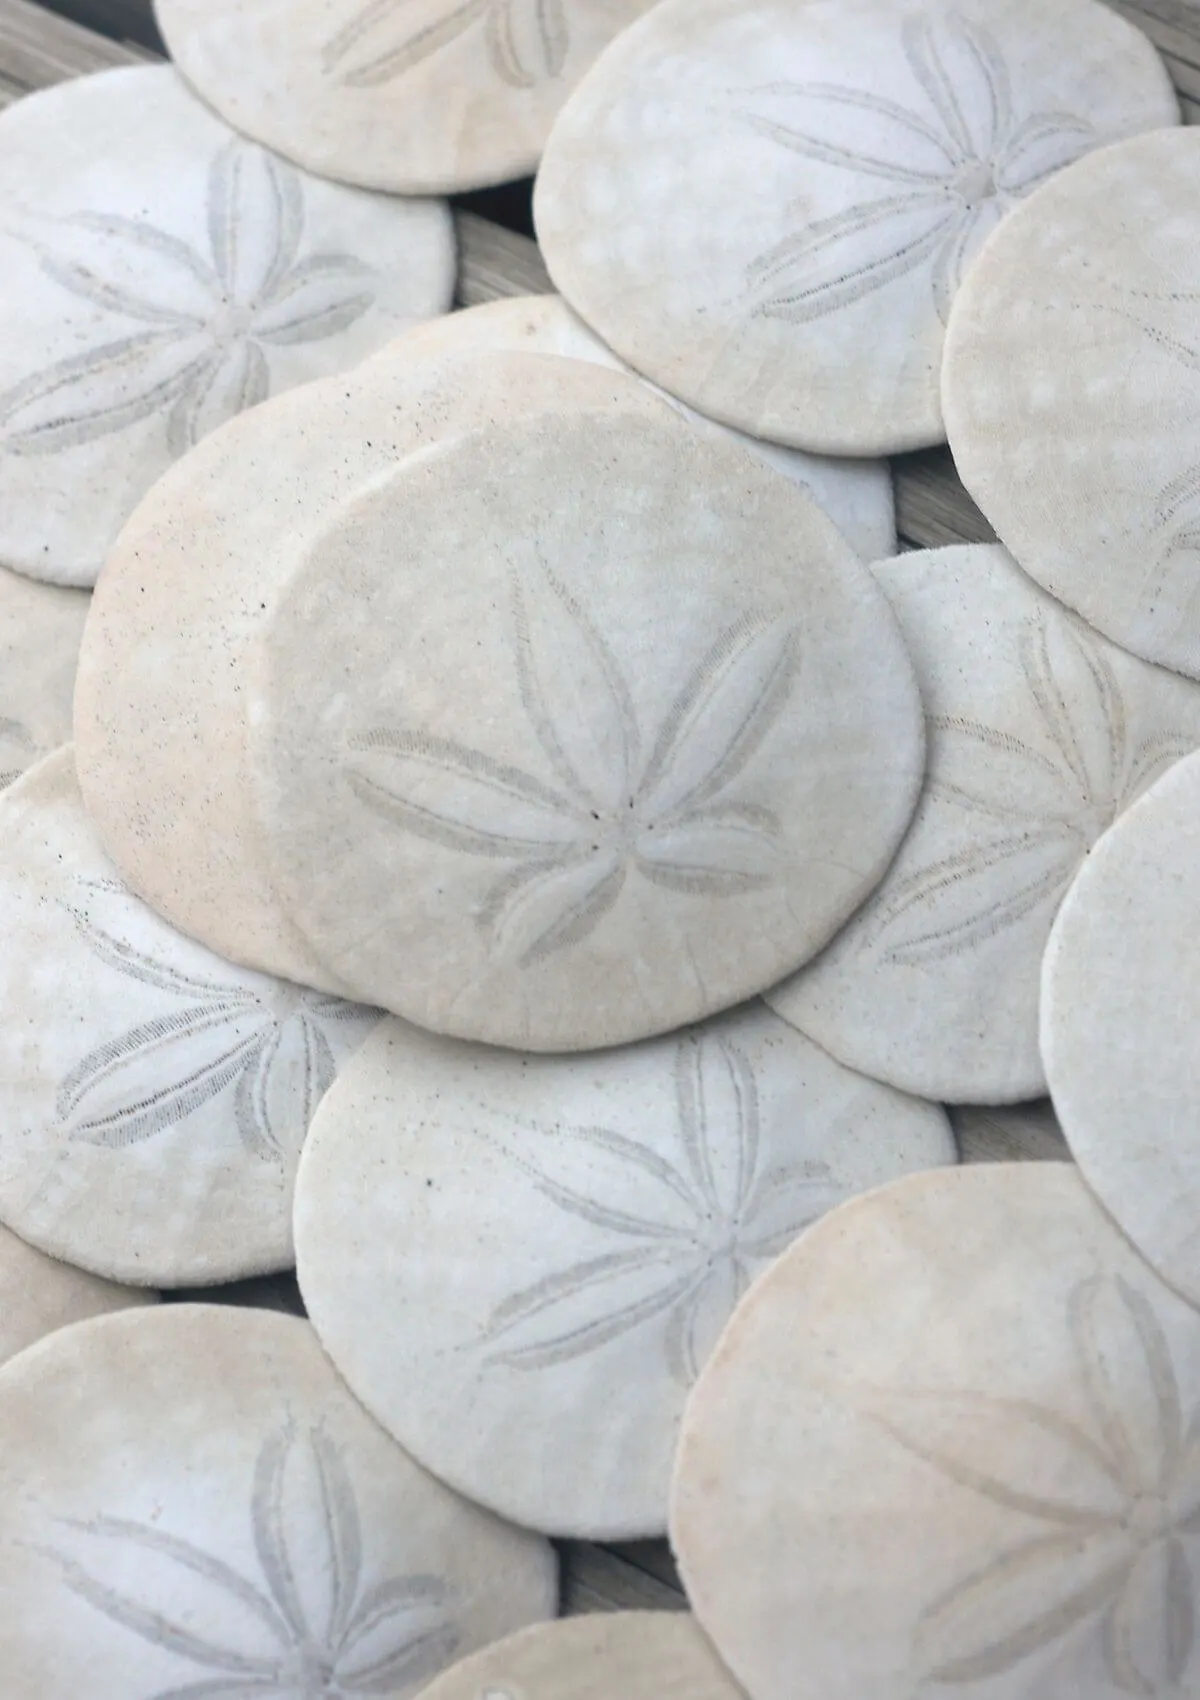 Sand dollars souvenirs from Florida